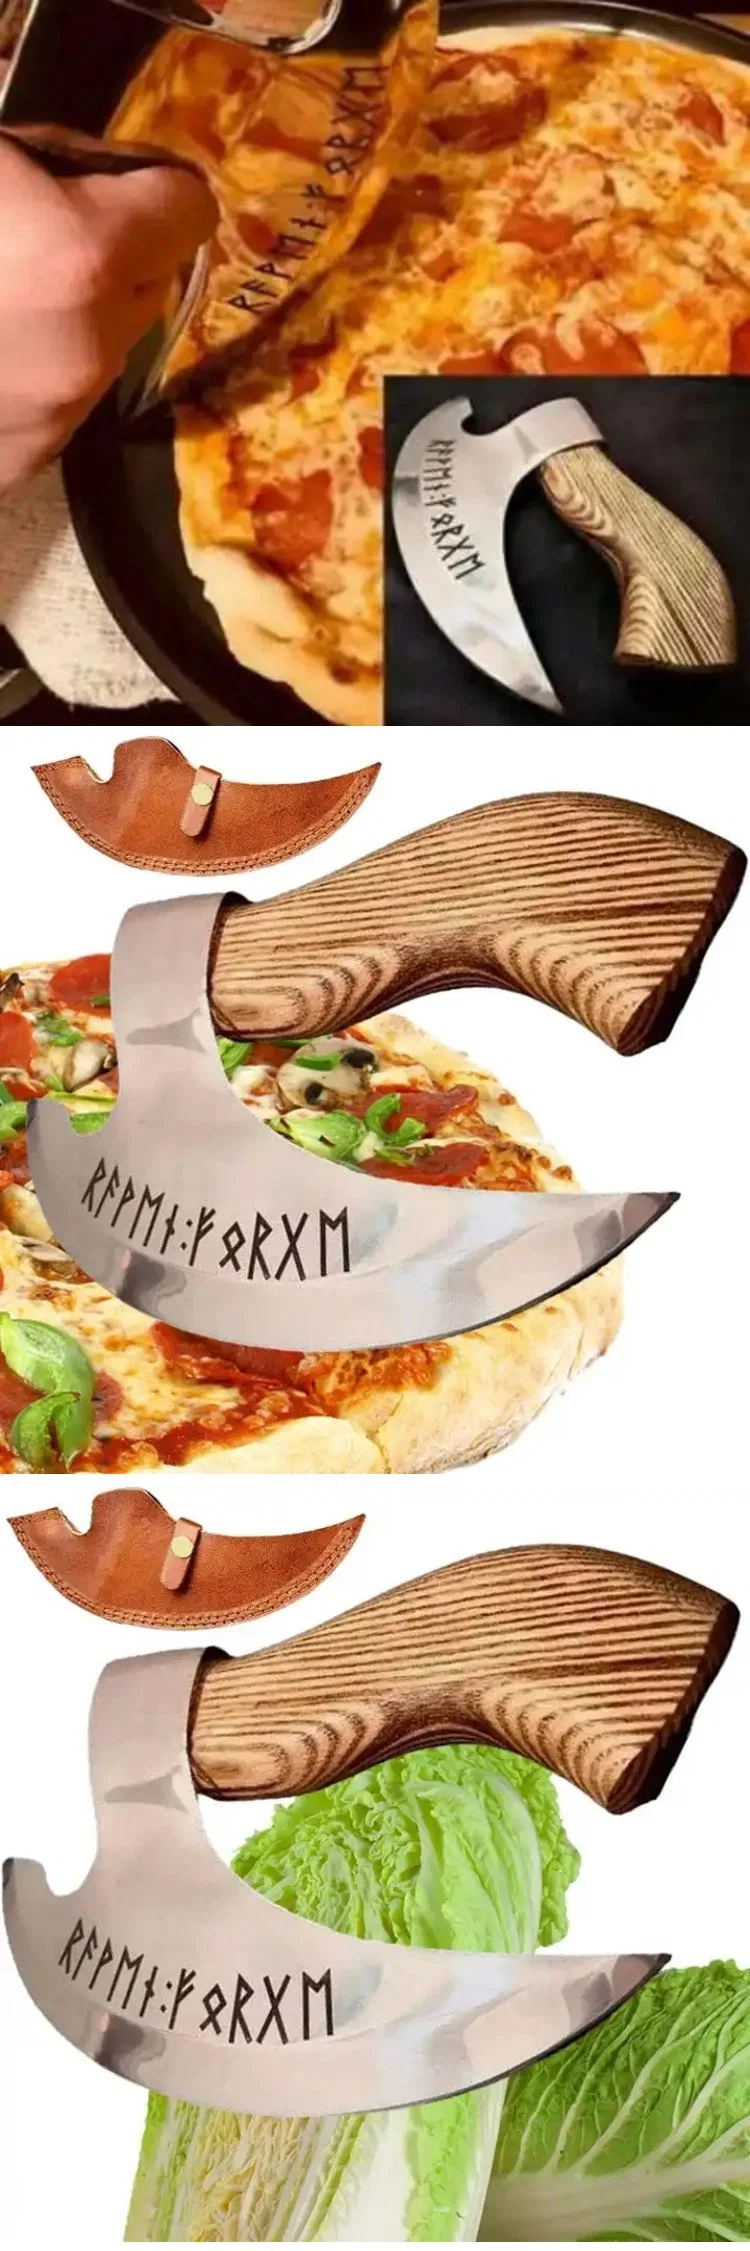 Stainless Steel Kitchen Pizza Tool Accessories Pizza Axe for sale